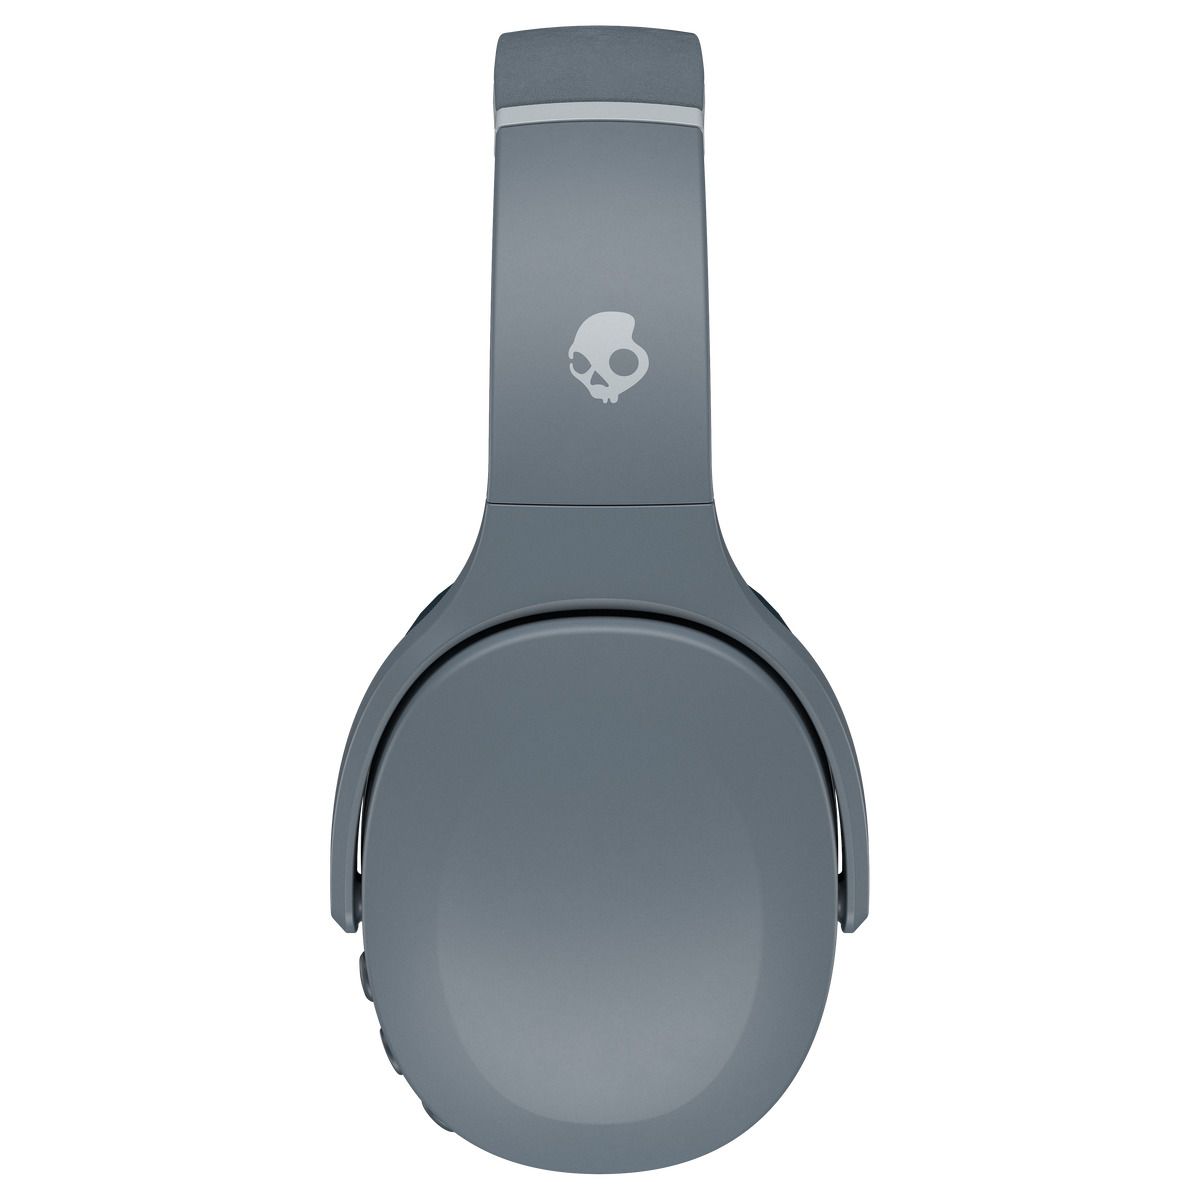 Skullcandy Crusher Evo Wireless Over-Ear-Headphone with Rapid Charge Personal Sound App and Built-in Tile Finding Technology with mic (Chill Gray)